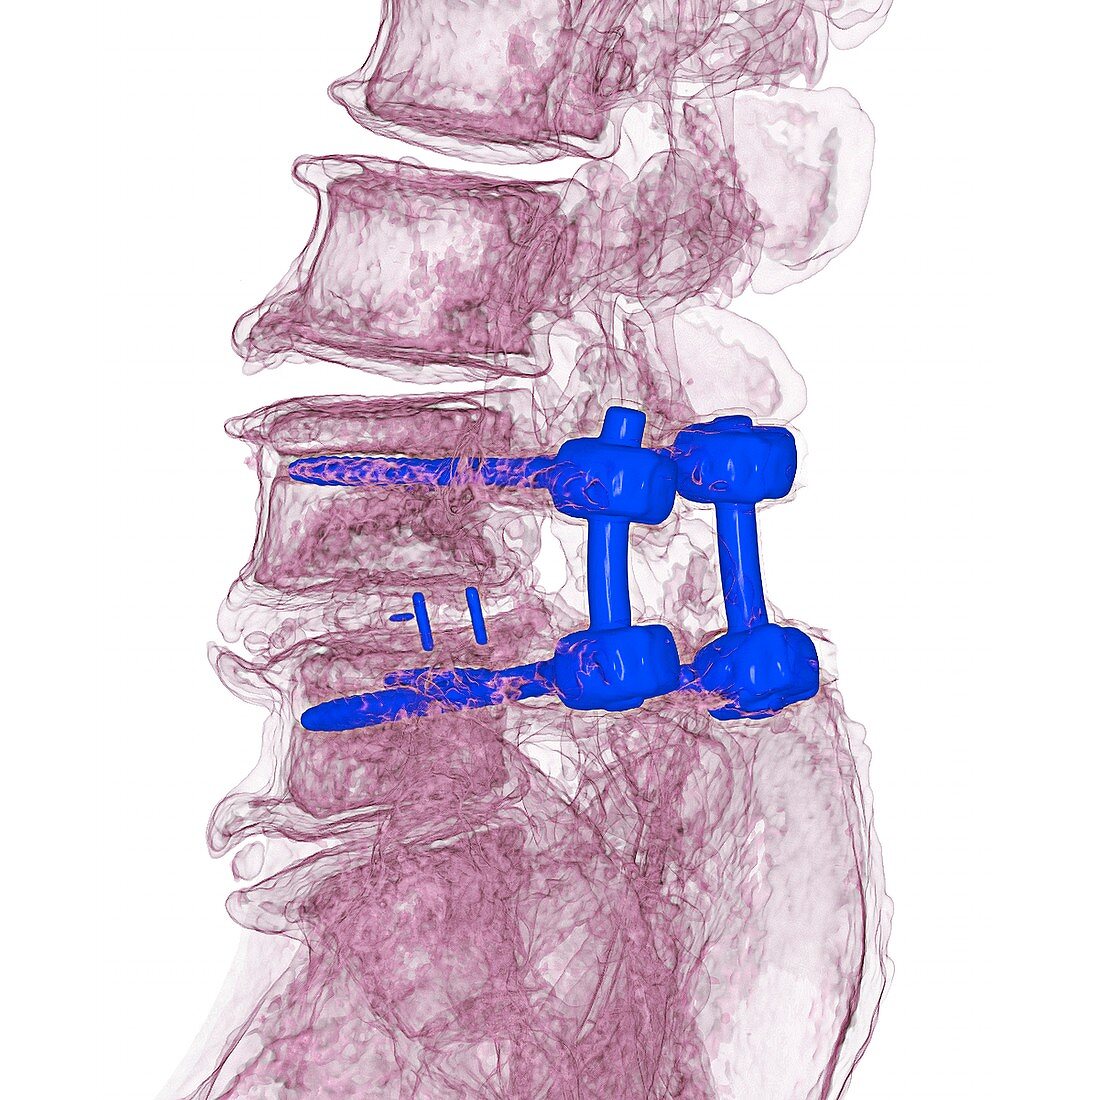 Spinal implant in lumbar fusion, 3D CT scan